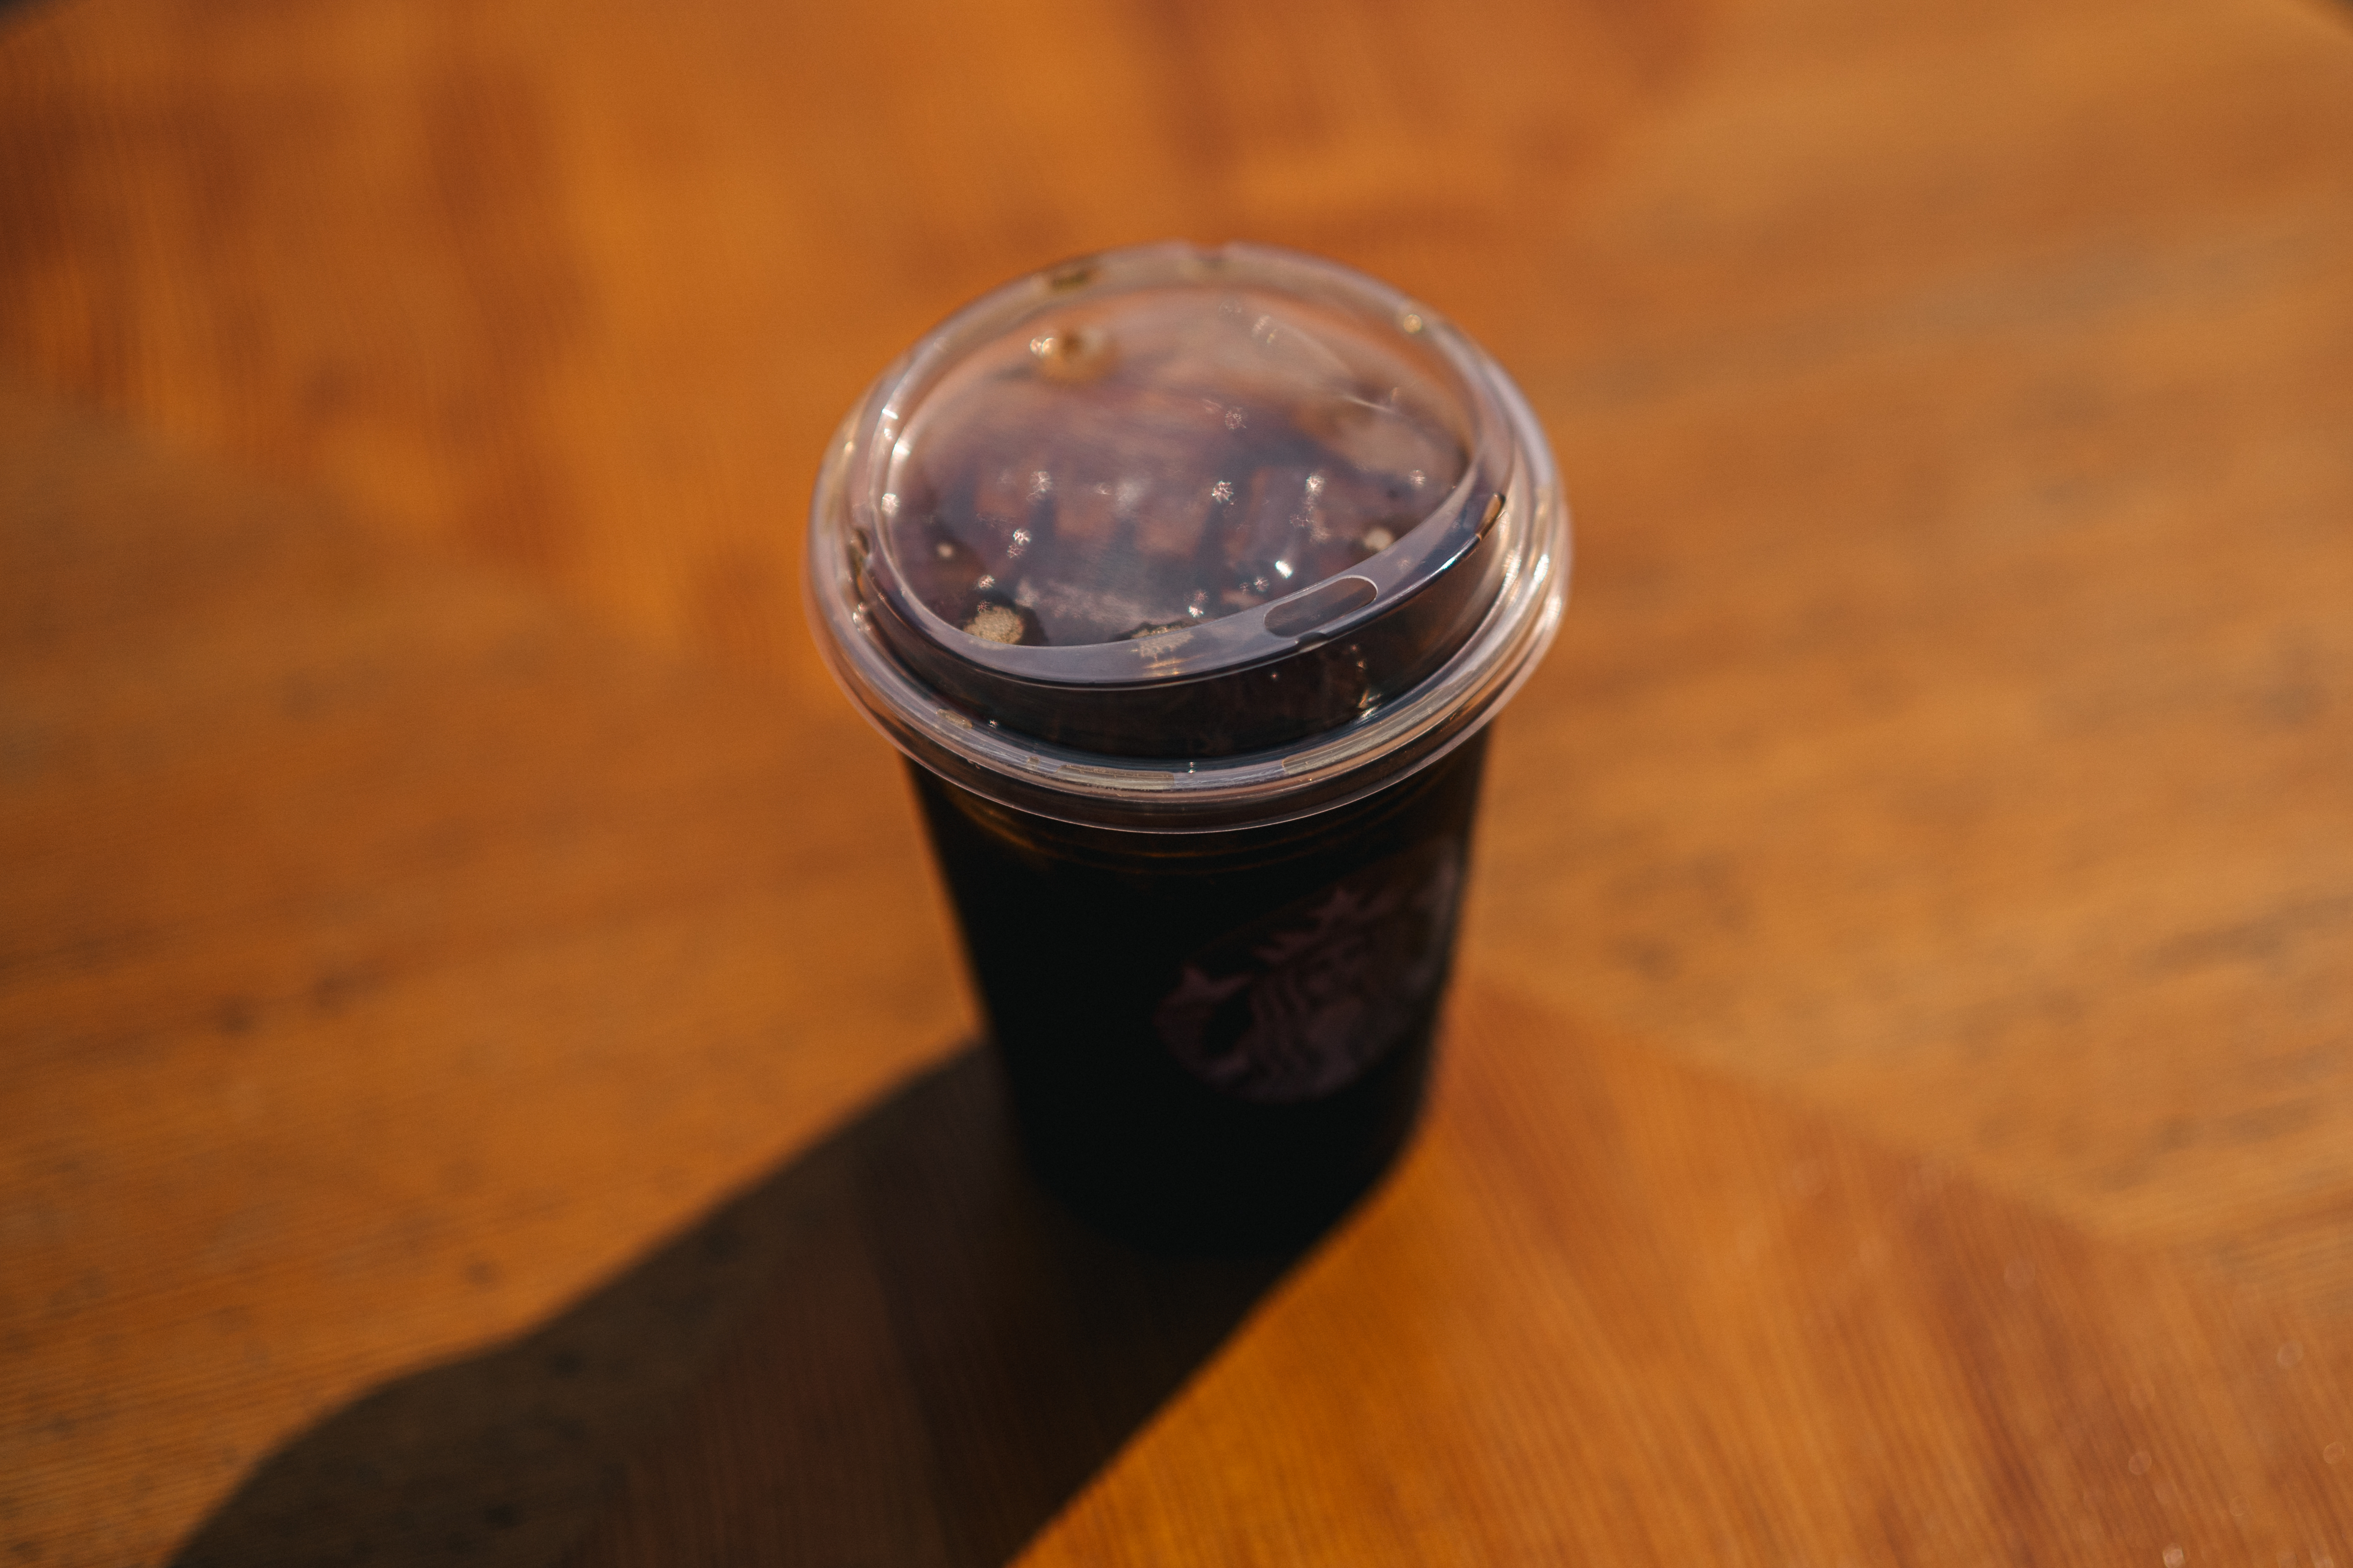 McDonald's Is Testing Strawless Lids In Select Markets